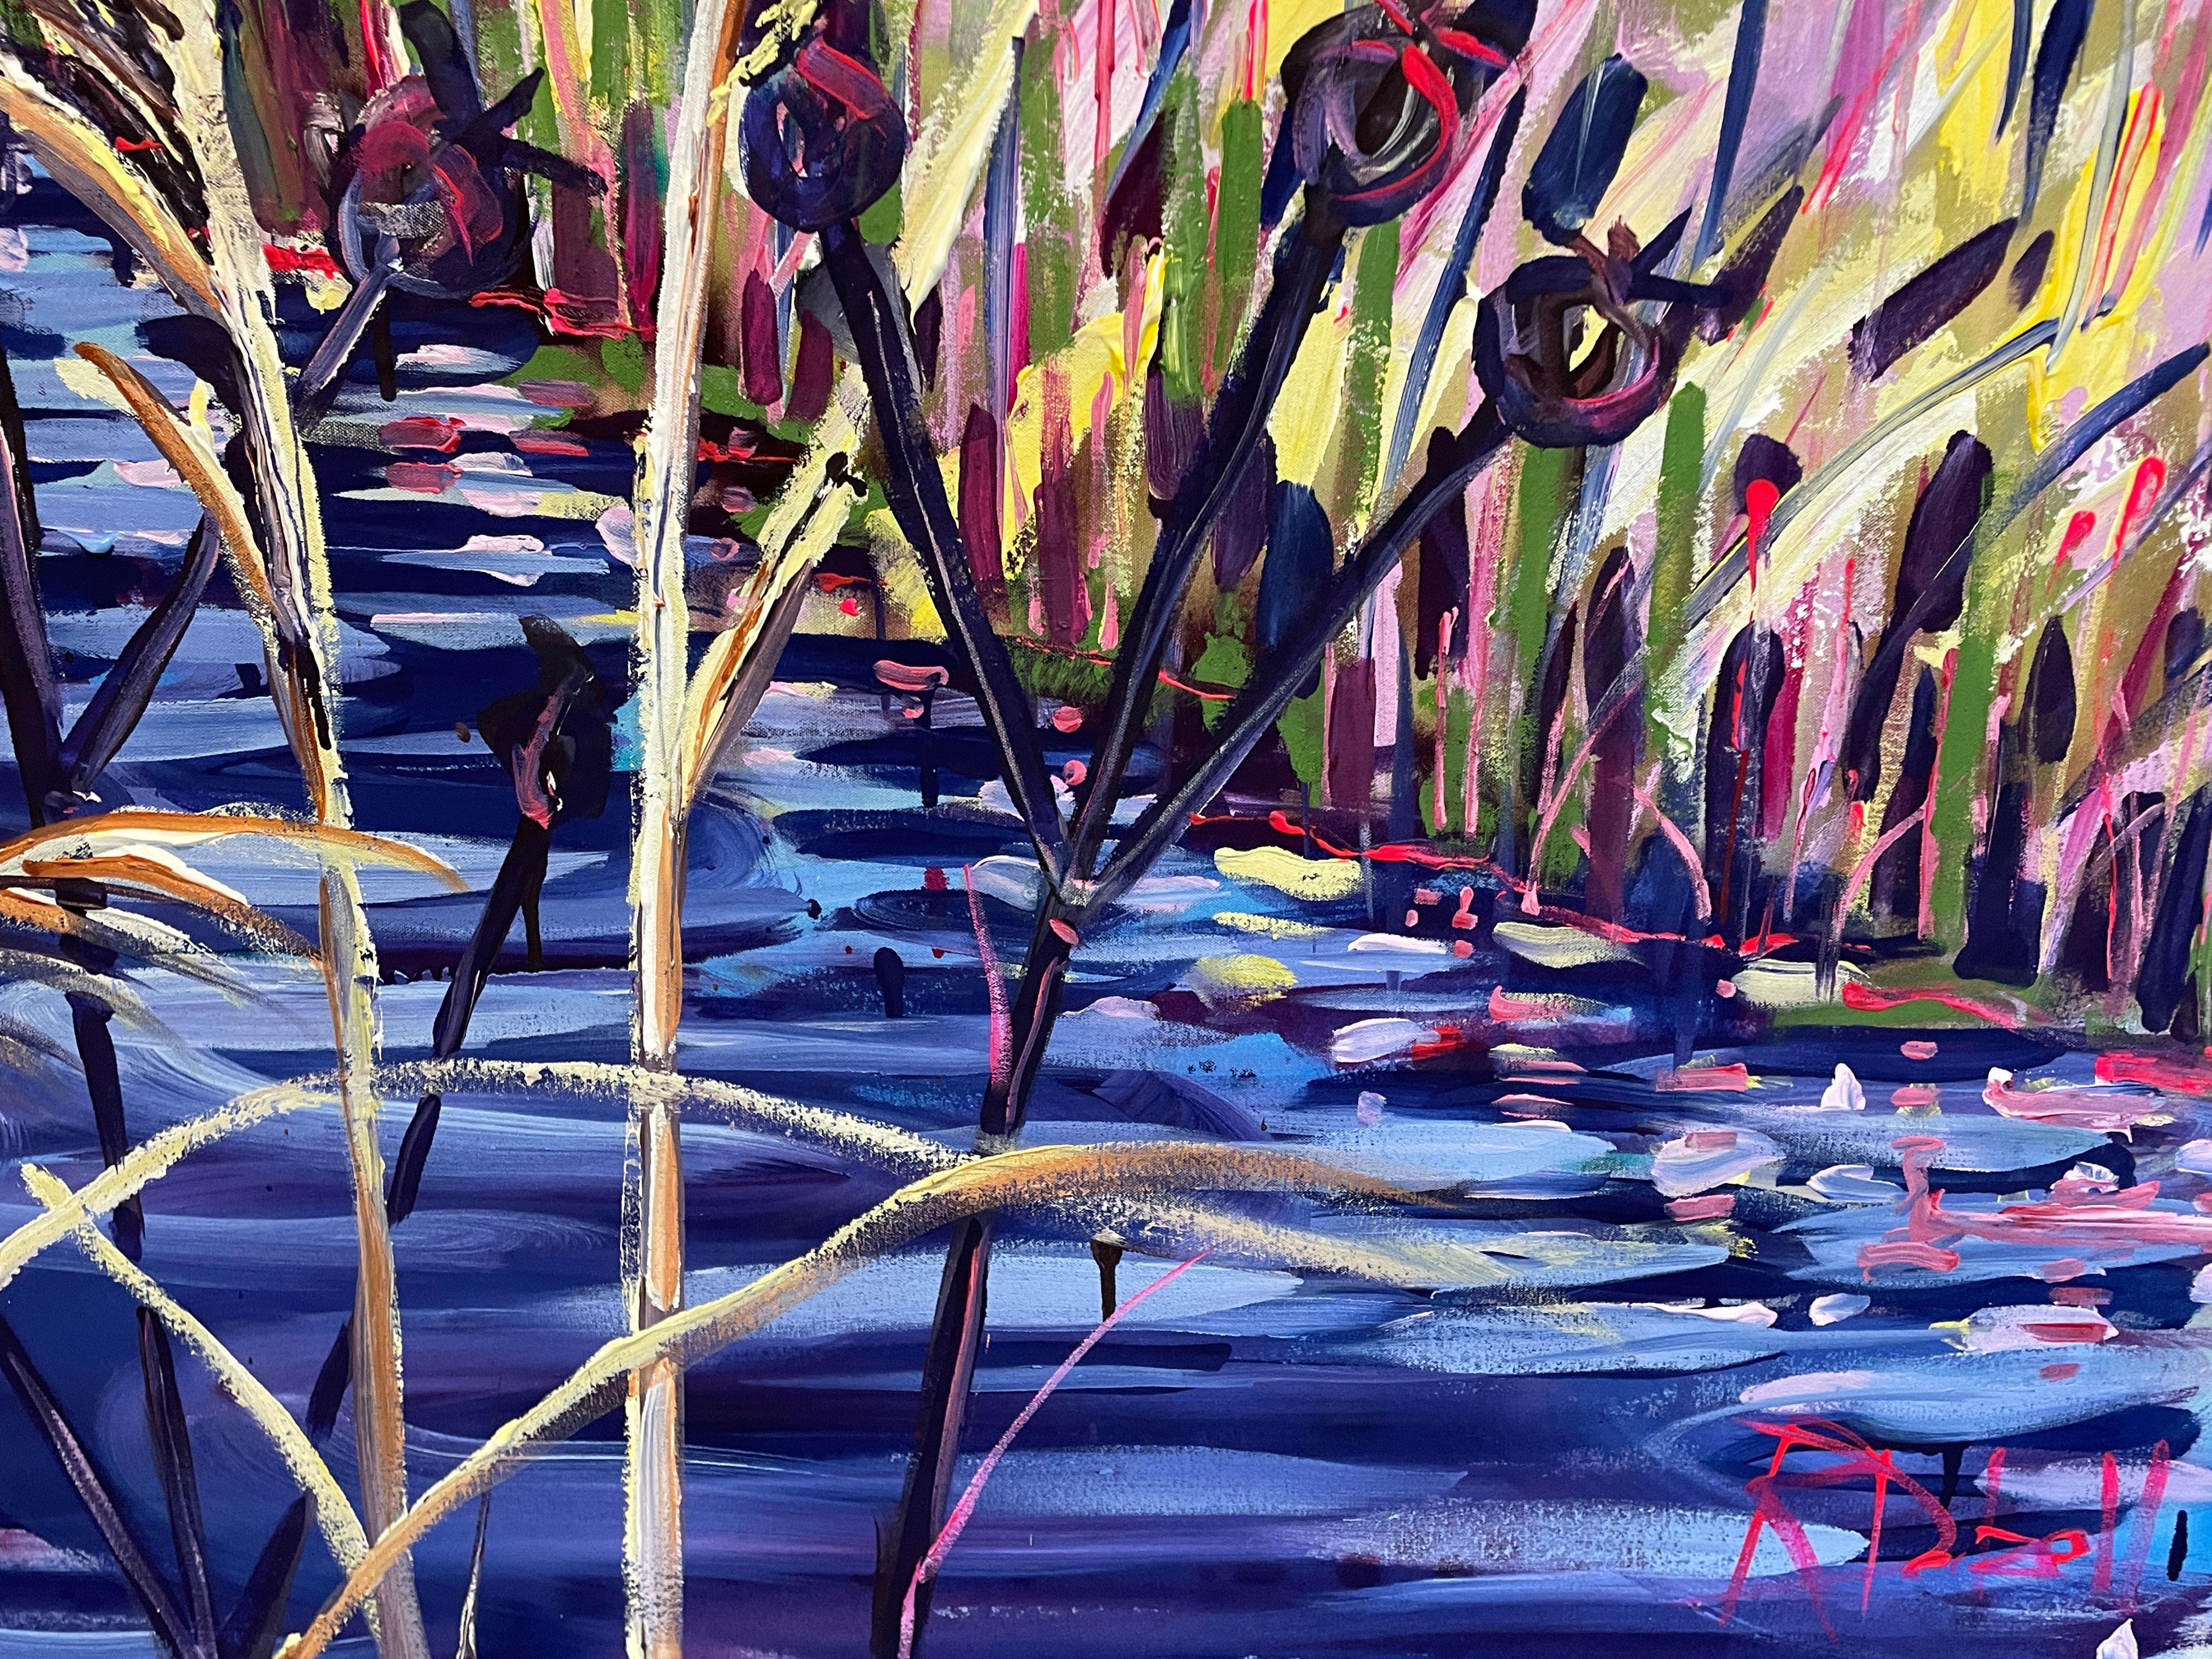 Where the reeds bend in the cool breeze by Rachael Dalzell.  For Sale 1